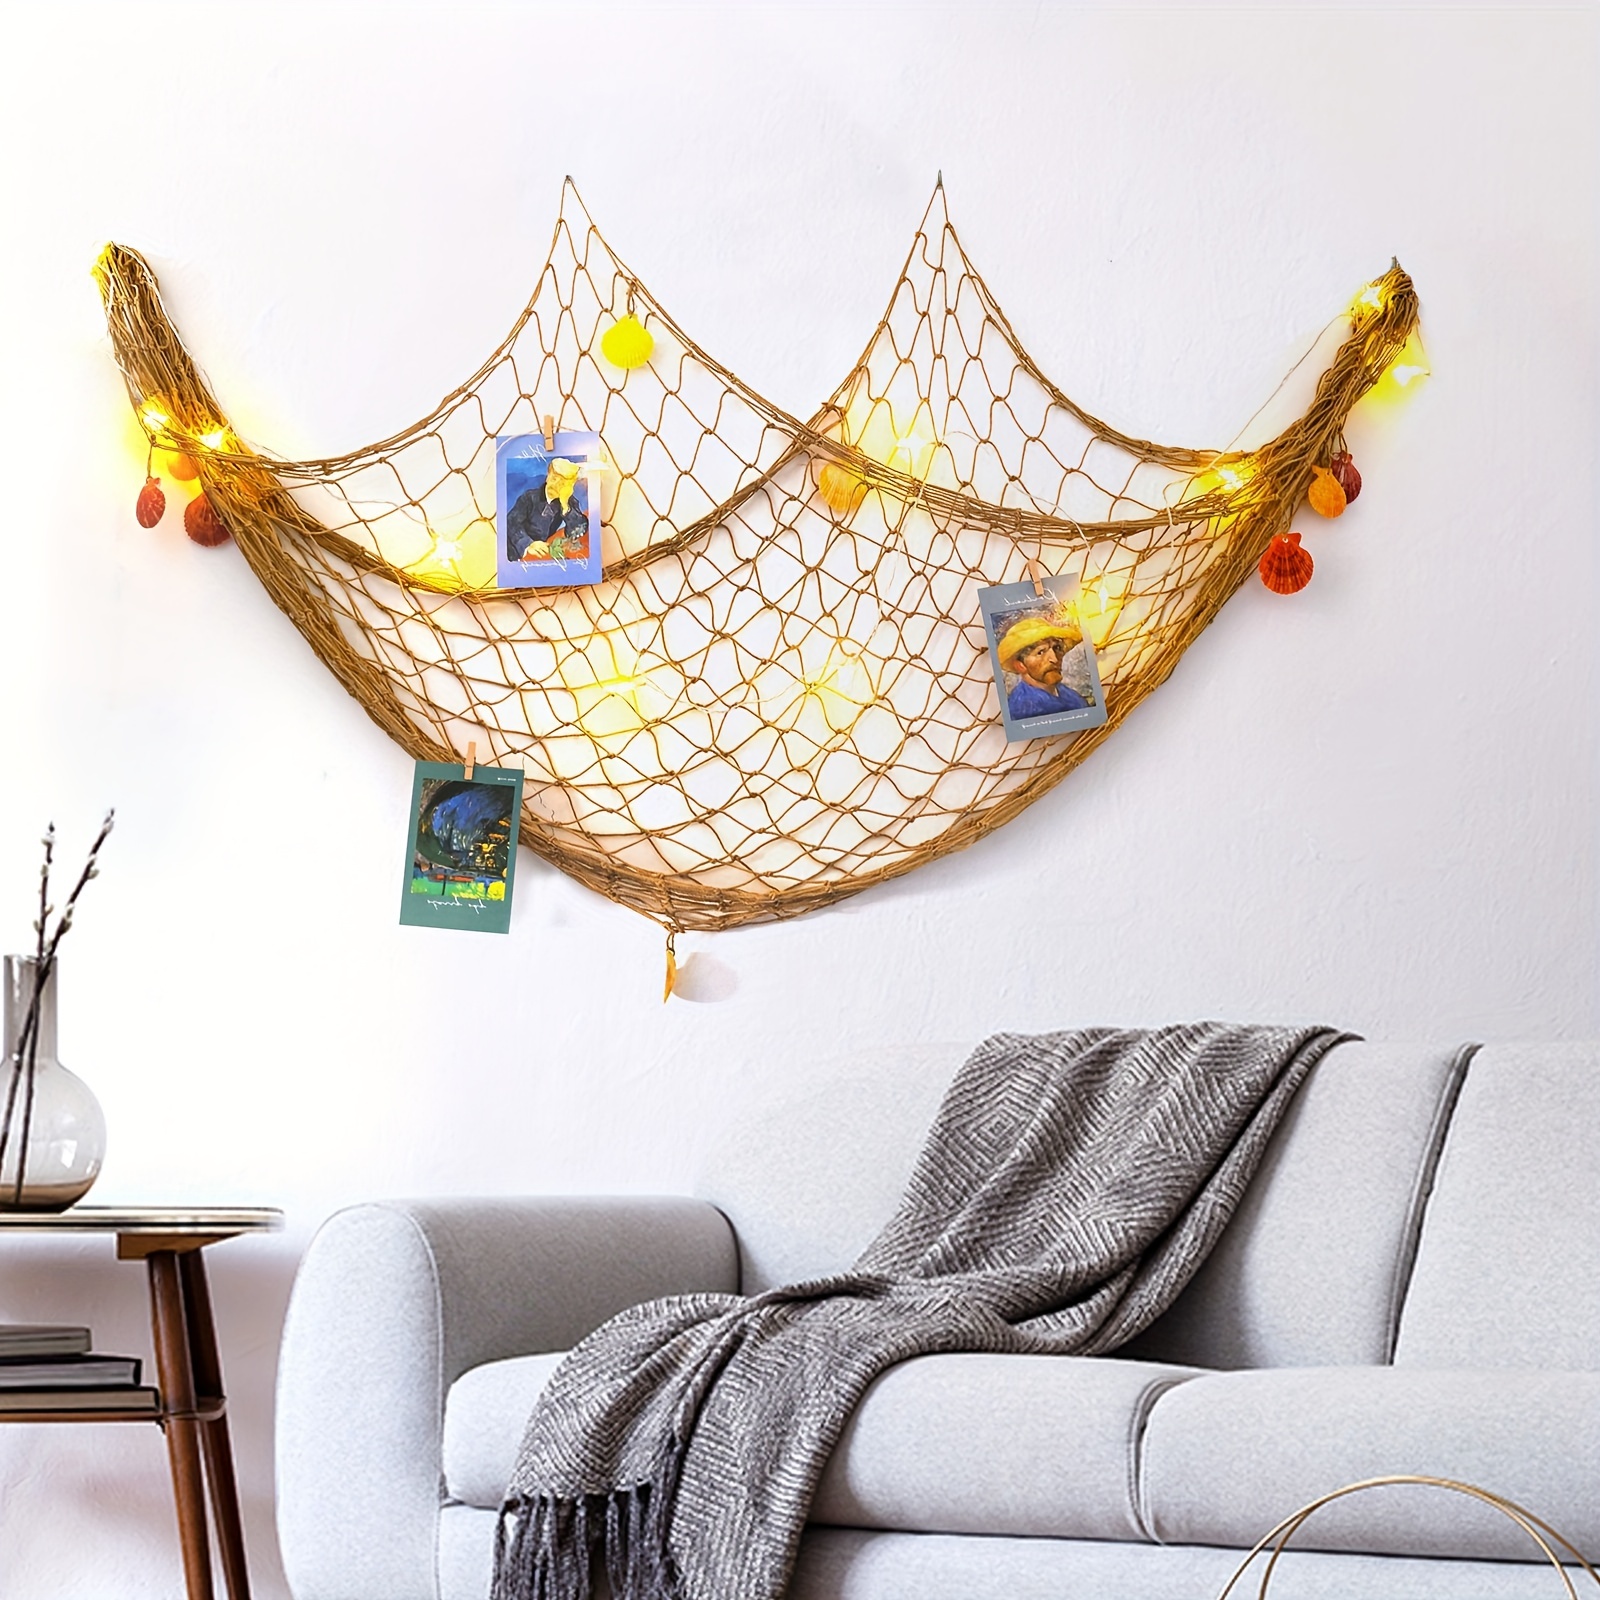 6.6 x 3.3 ft Decorative Fish Net with Shells Blue Mediterranean Style Nautical Decorative Fishing Net Hanging Home Decor Room Decoration, Size: 39 x